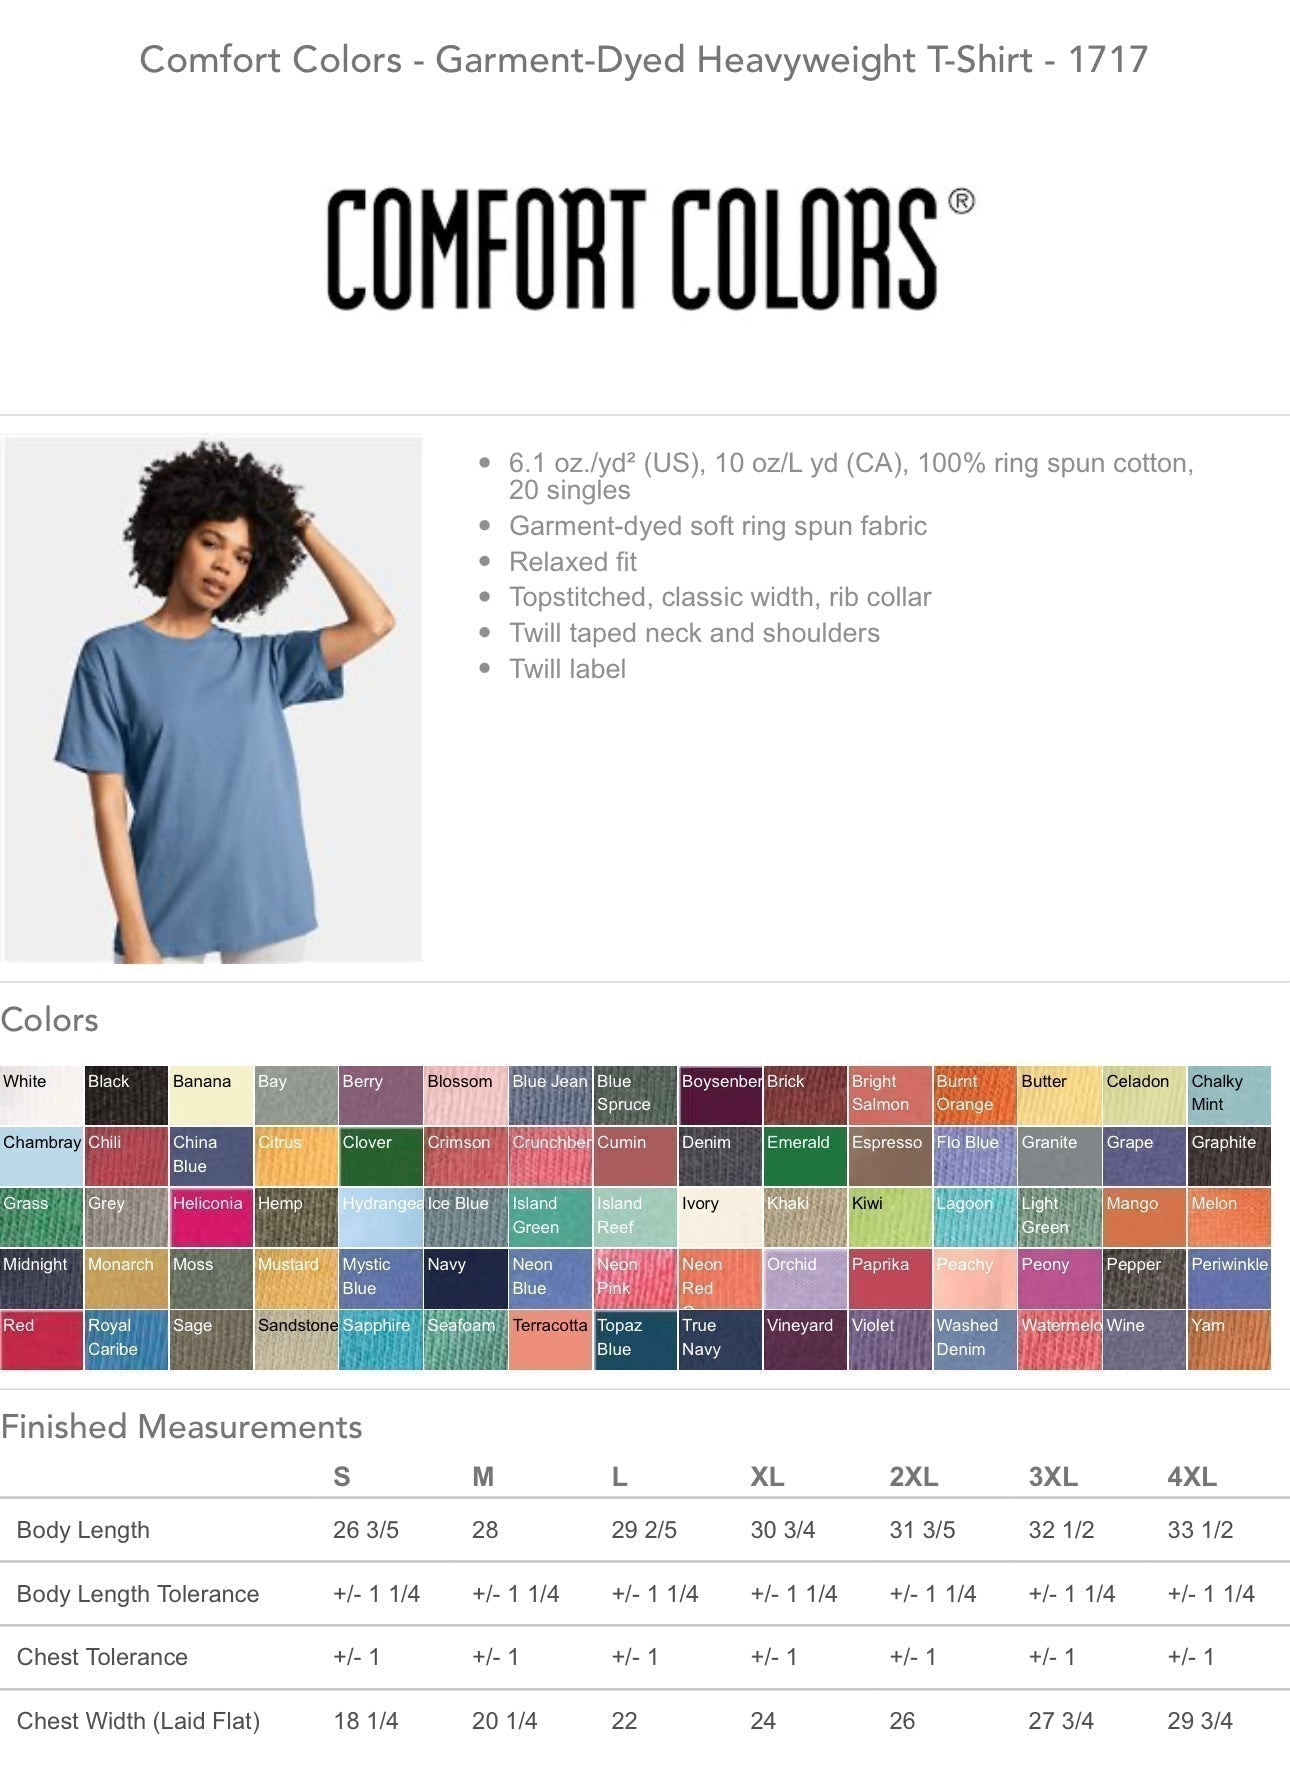 Created with a purpose - Comfort Color